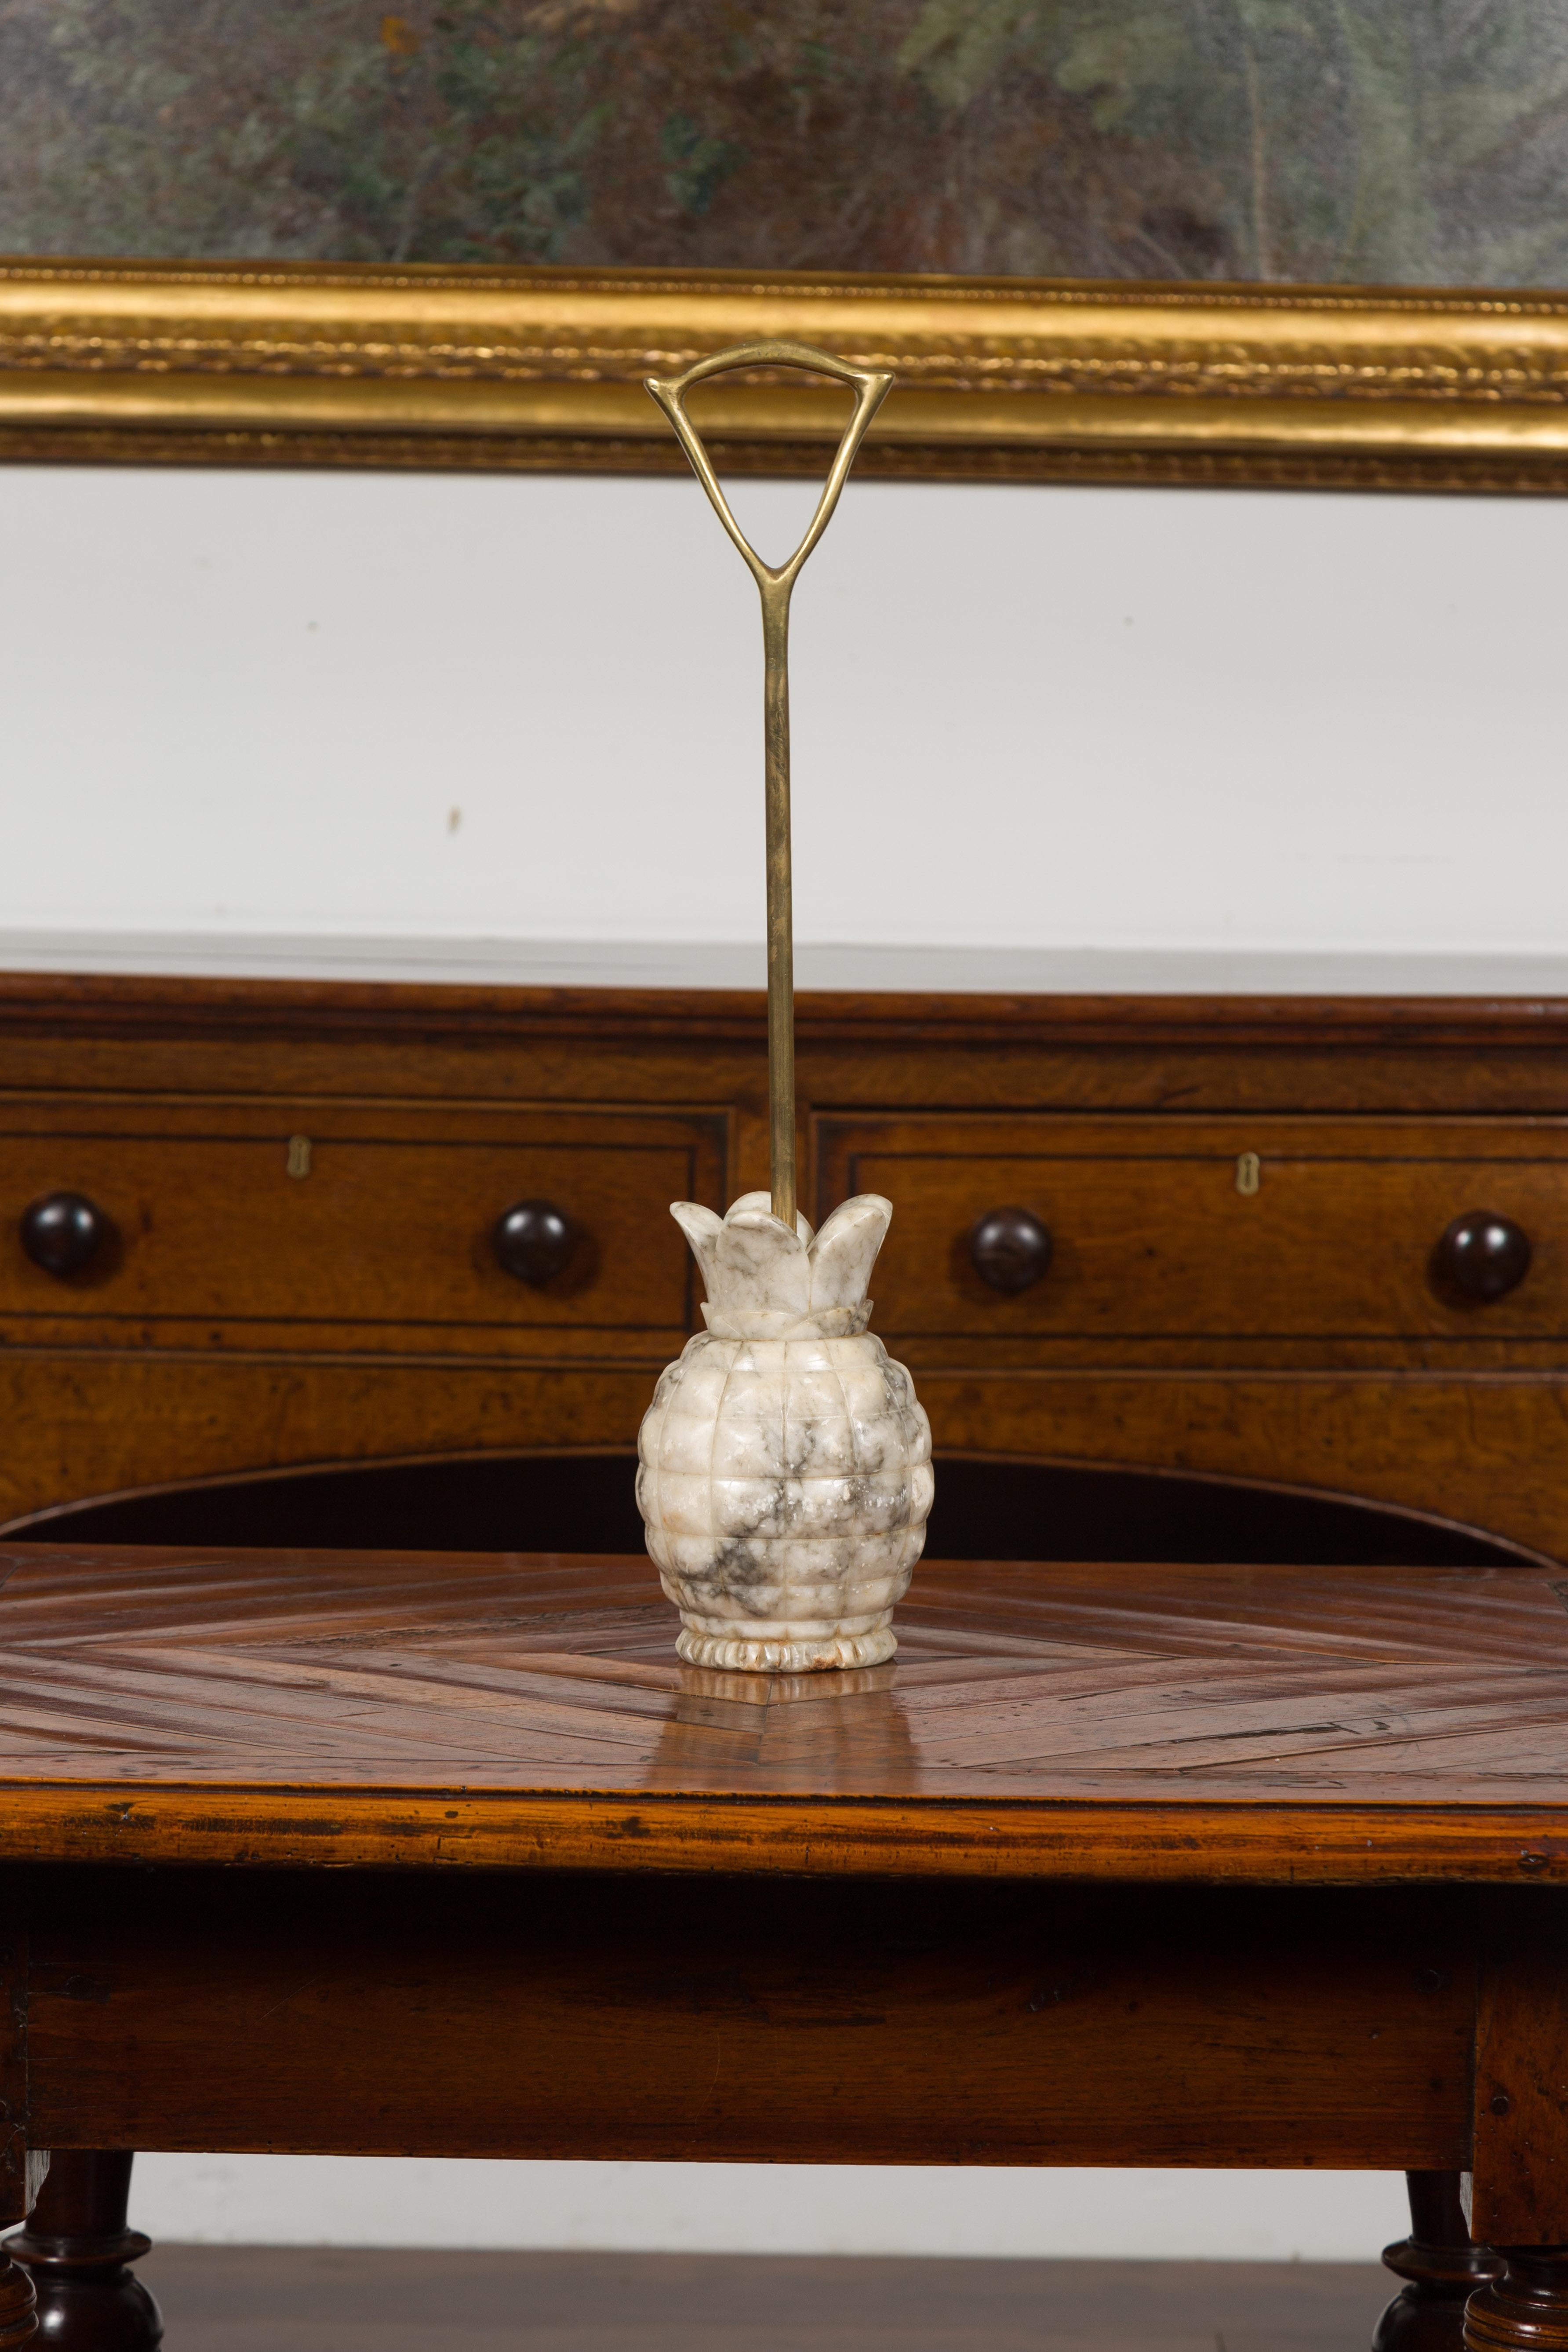 An English doorstop from the mid-20th century, with carved marble pineapple and brass handle. Created in England during the first half of the 20th century, this door porter features a marble pineapple base connected to a brass shaft and handle. A